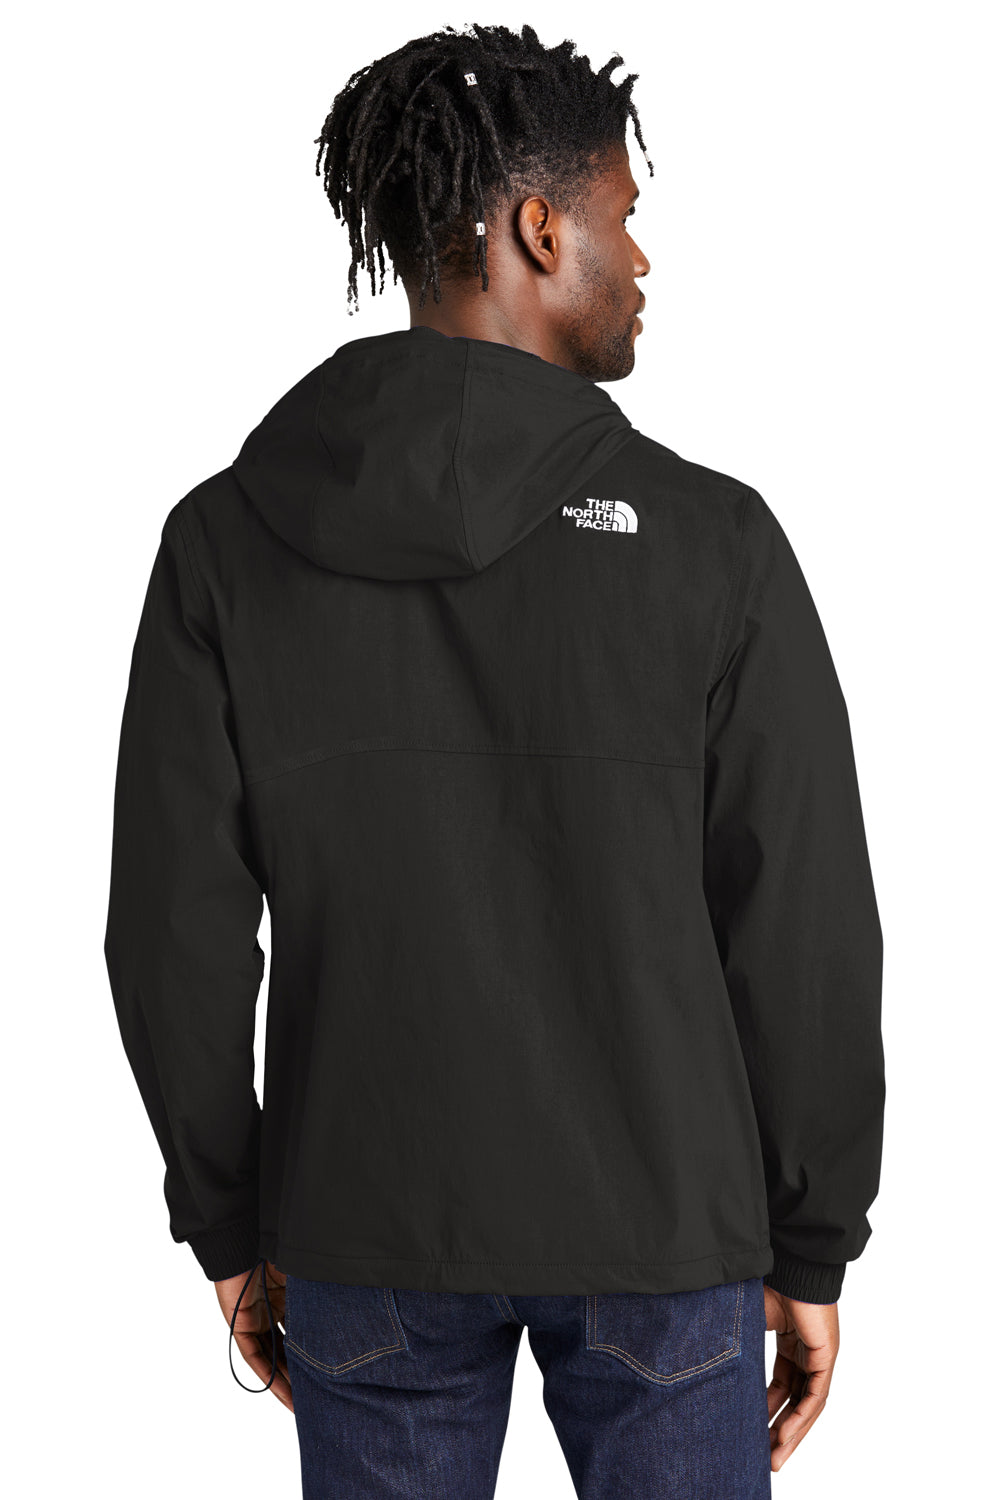 The North Face NF0A5IRW Wind & Water Resistant Packable 1/4 Zip Anorak Hooded Jacket Black Back